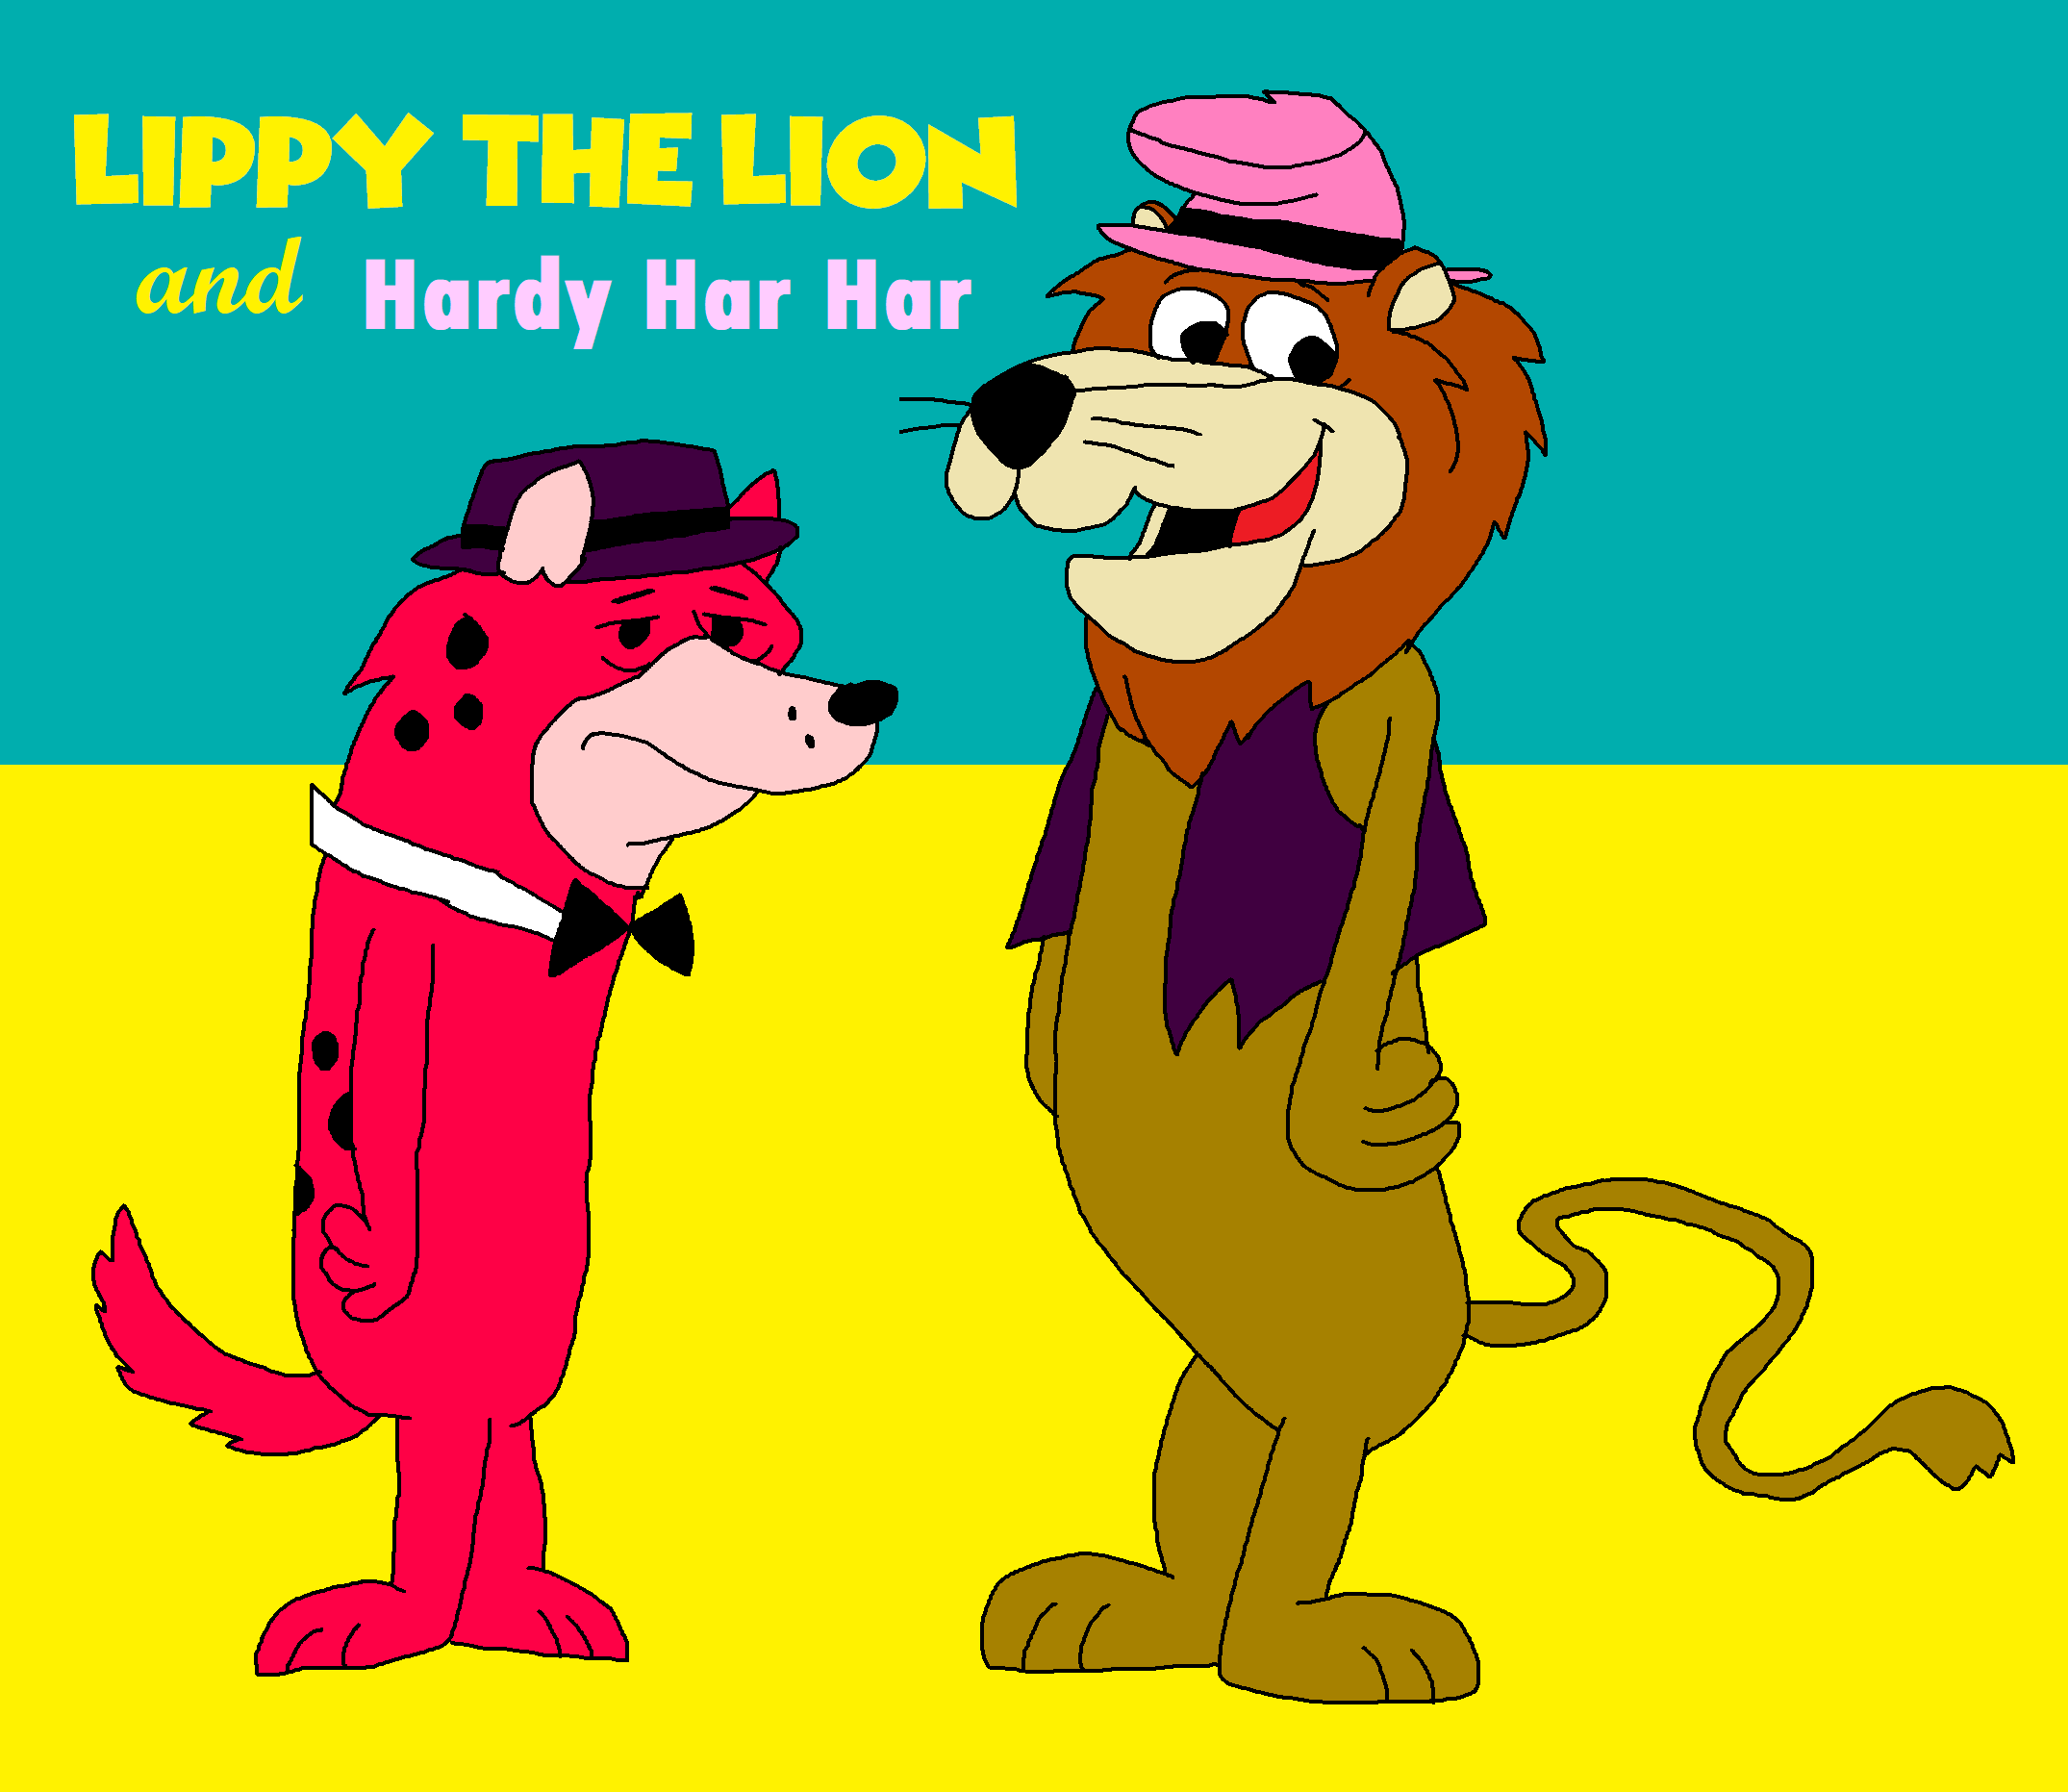 1593163978.johnhall_lippy_the_lion_and_hardy_har_har.png